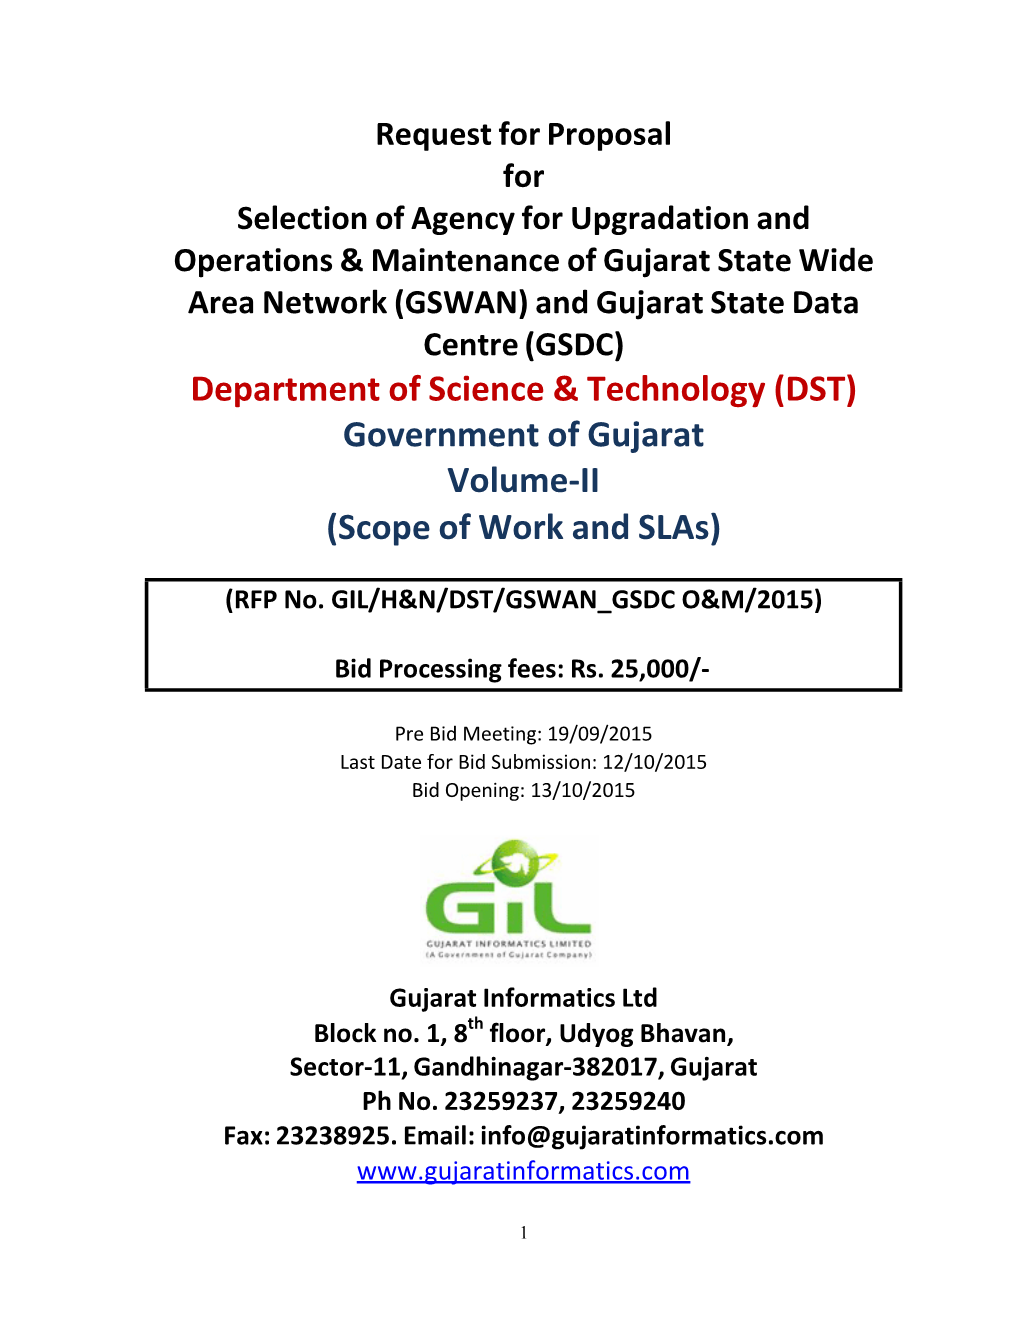 DST) Government of Gujarat Volume‐II (Scope of Work and Slas)